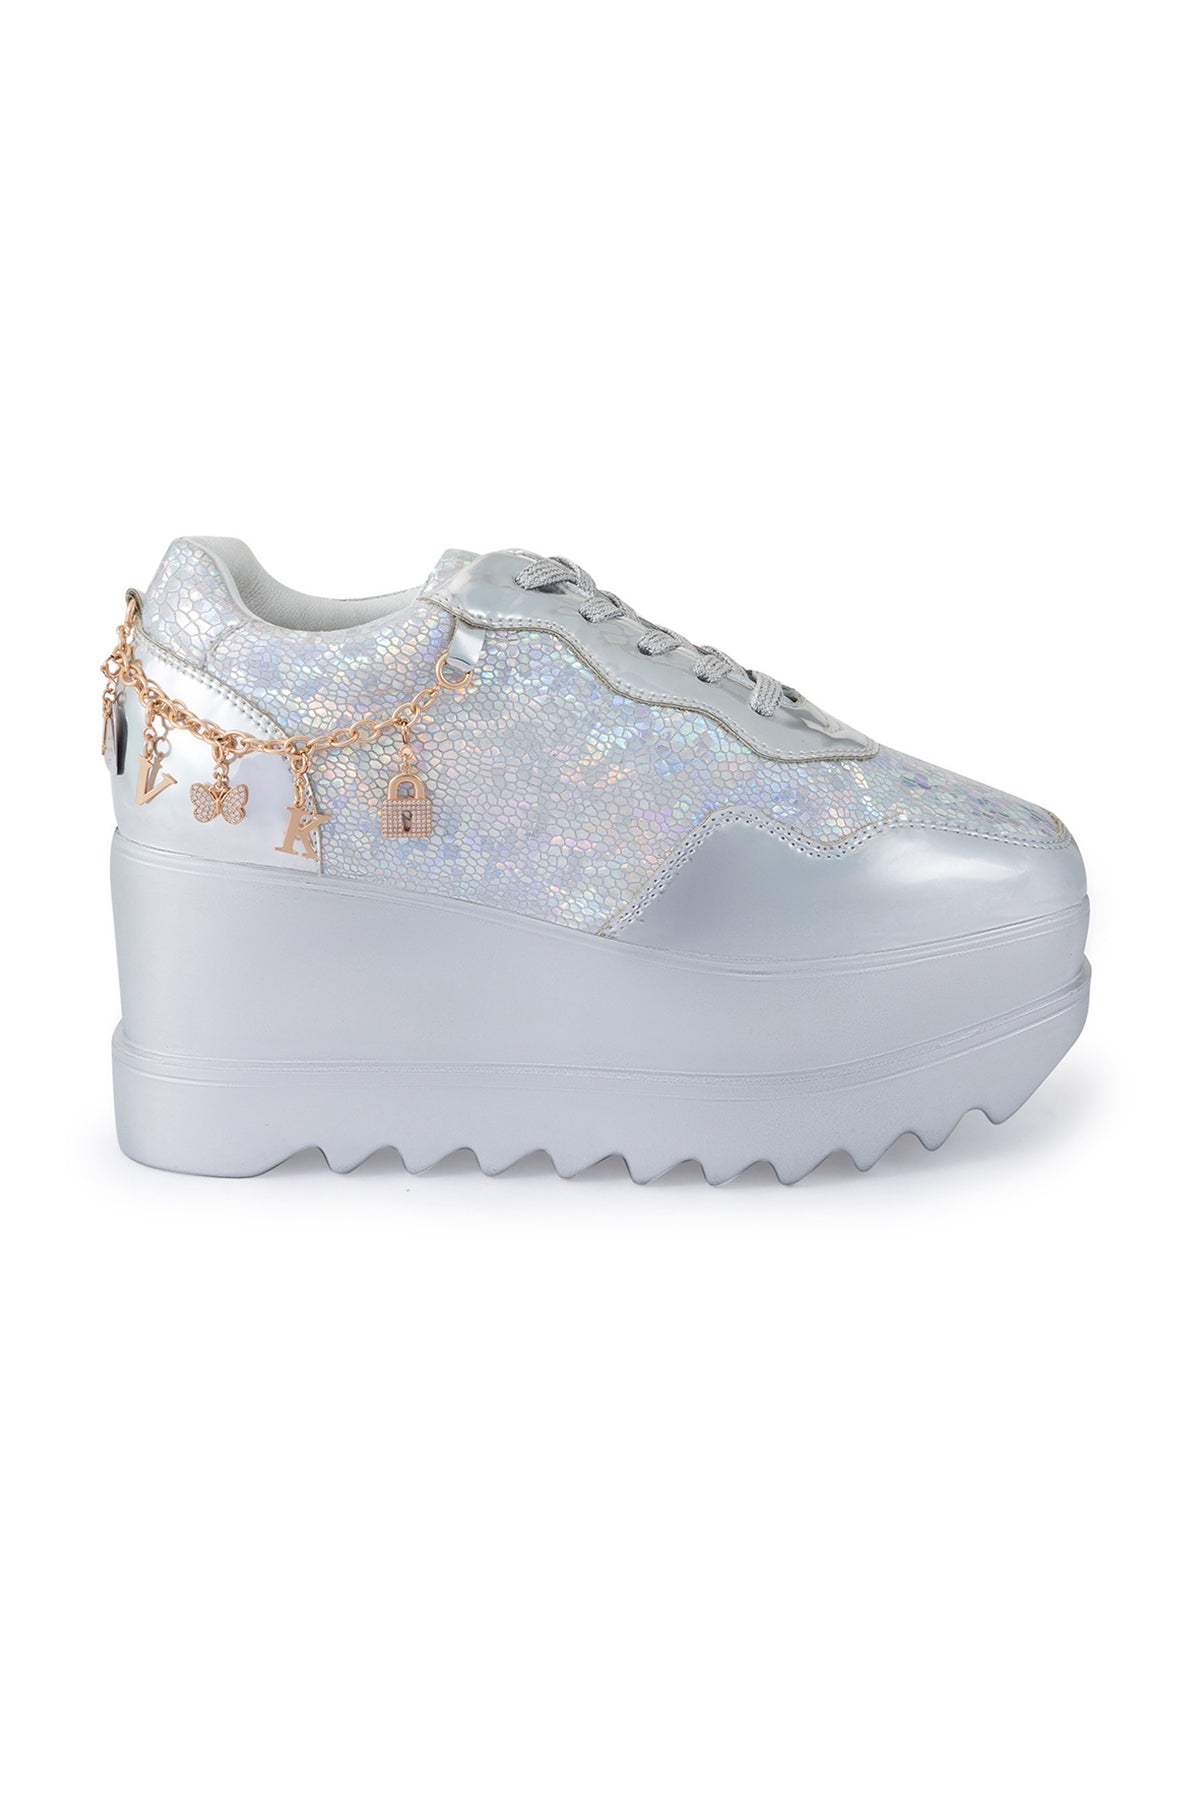 Disco 22 Signature Wedge Sneakers with Gold Chain Ornaments - Anaar